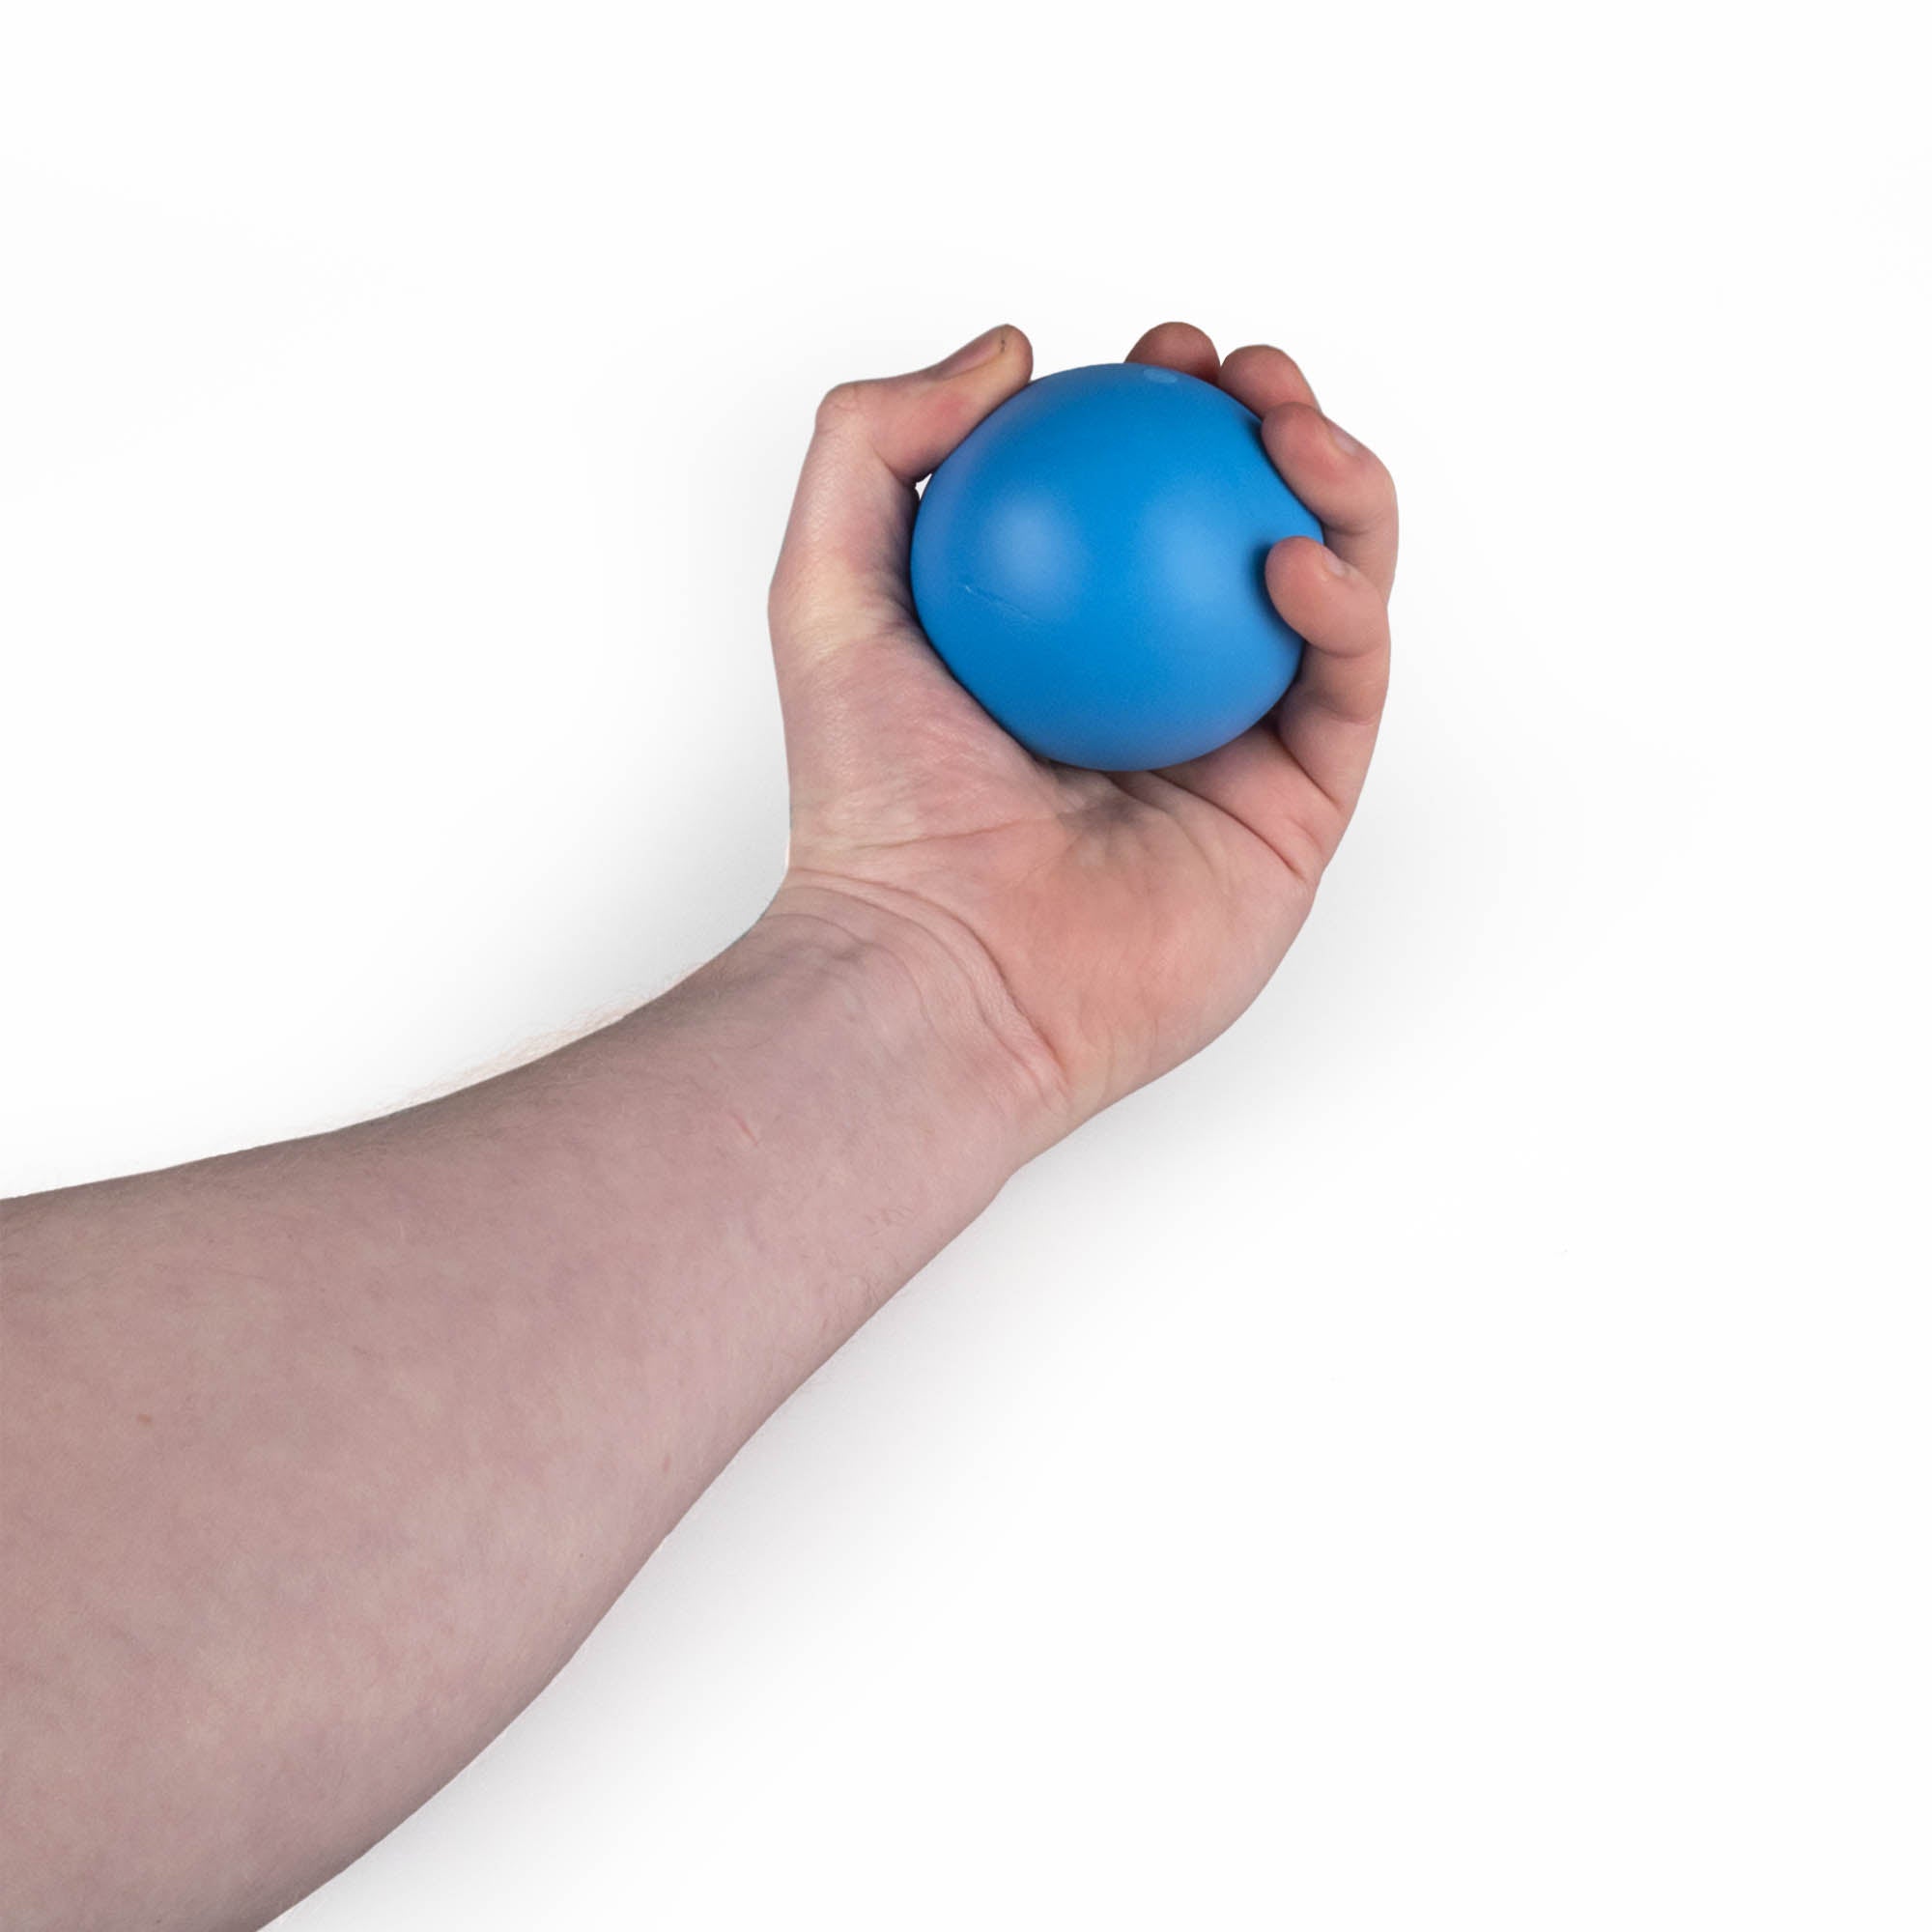 MMX 70mm blue juggling ball in hand